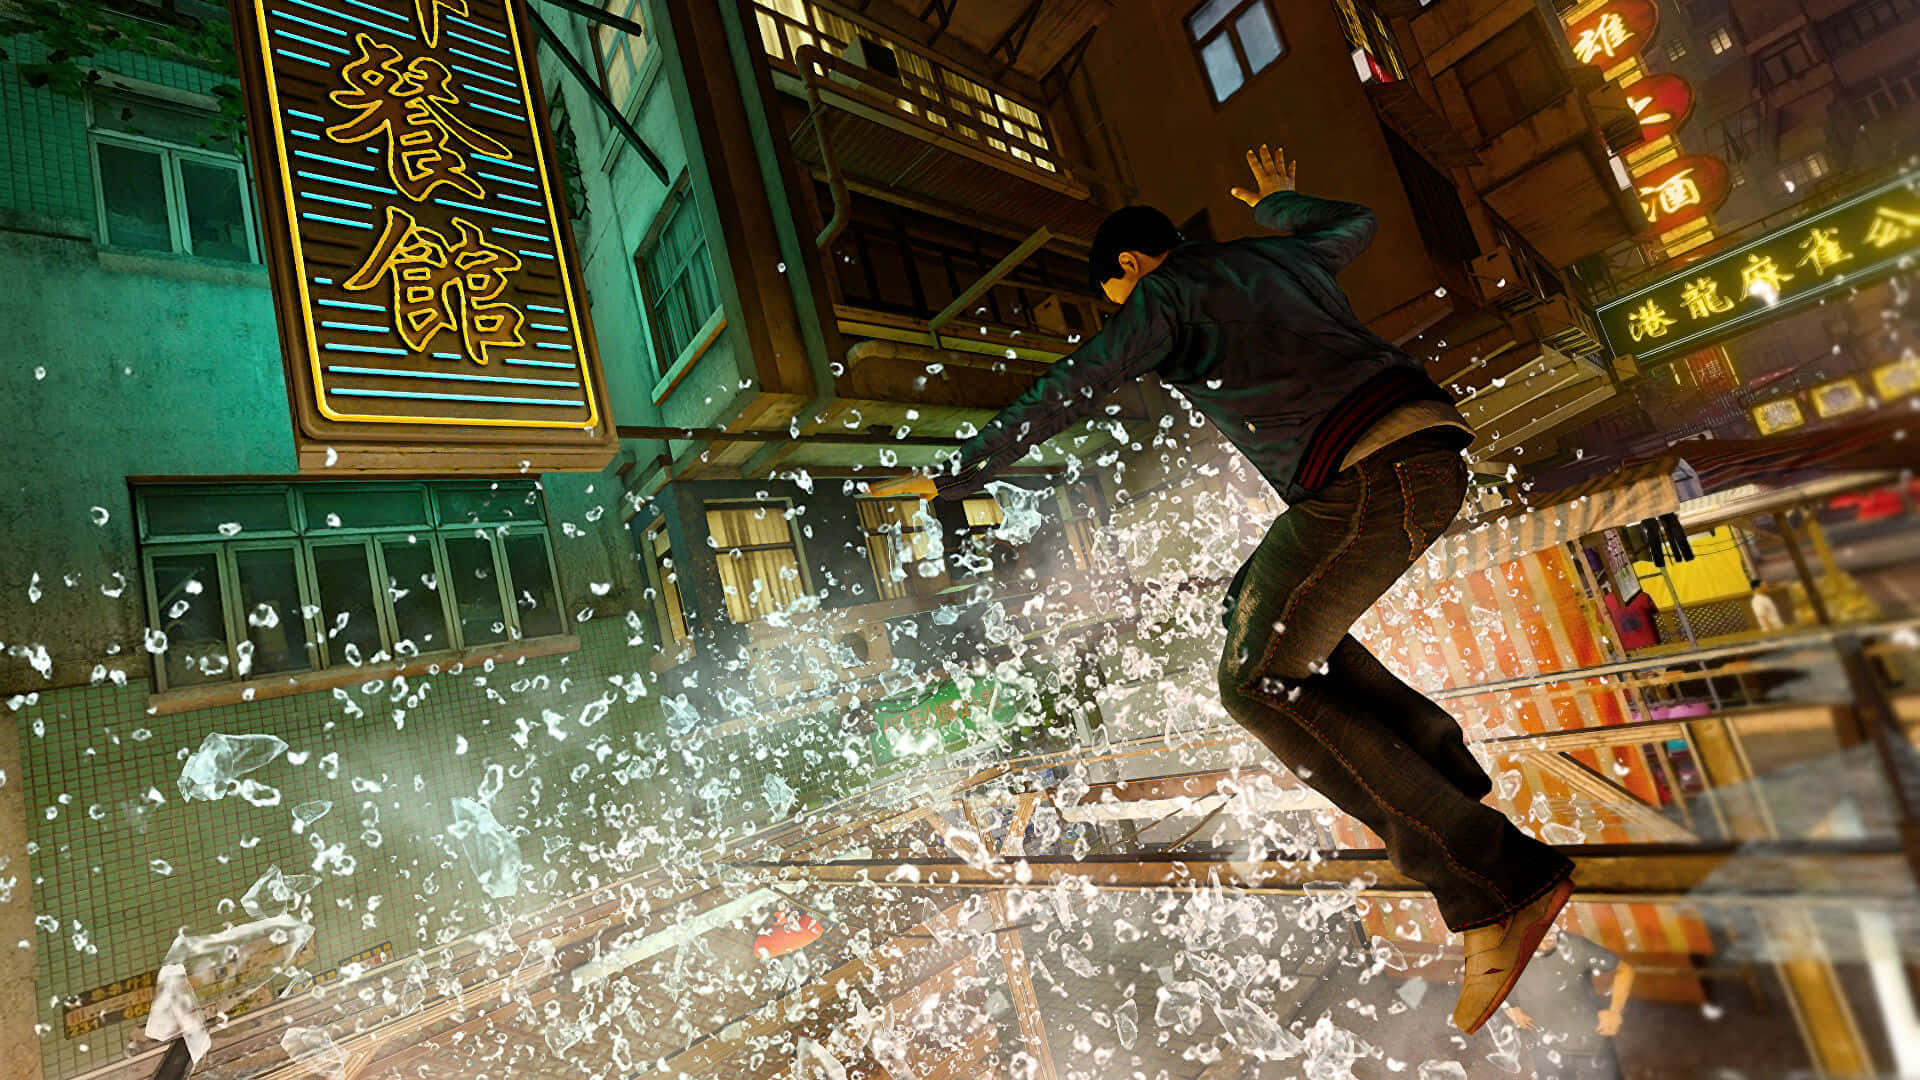 Race through the city streets of Hong Kong in "Sleeping Dogs"